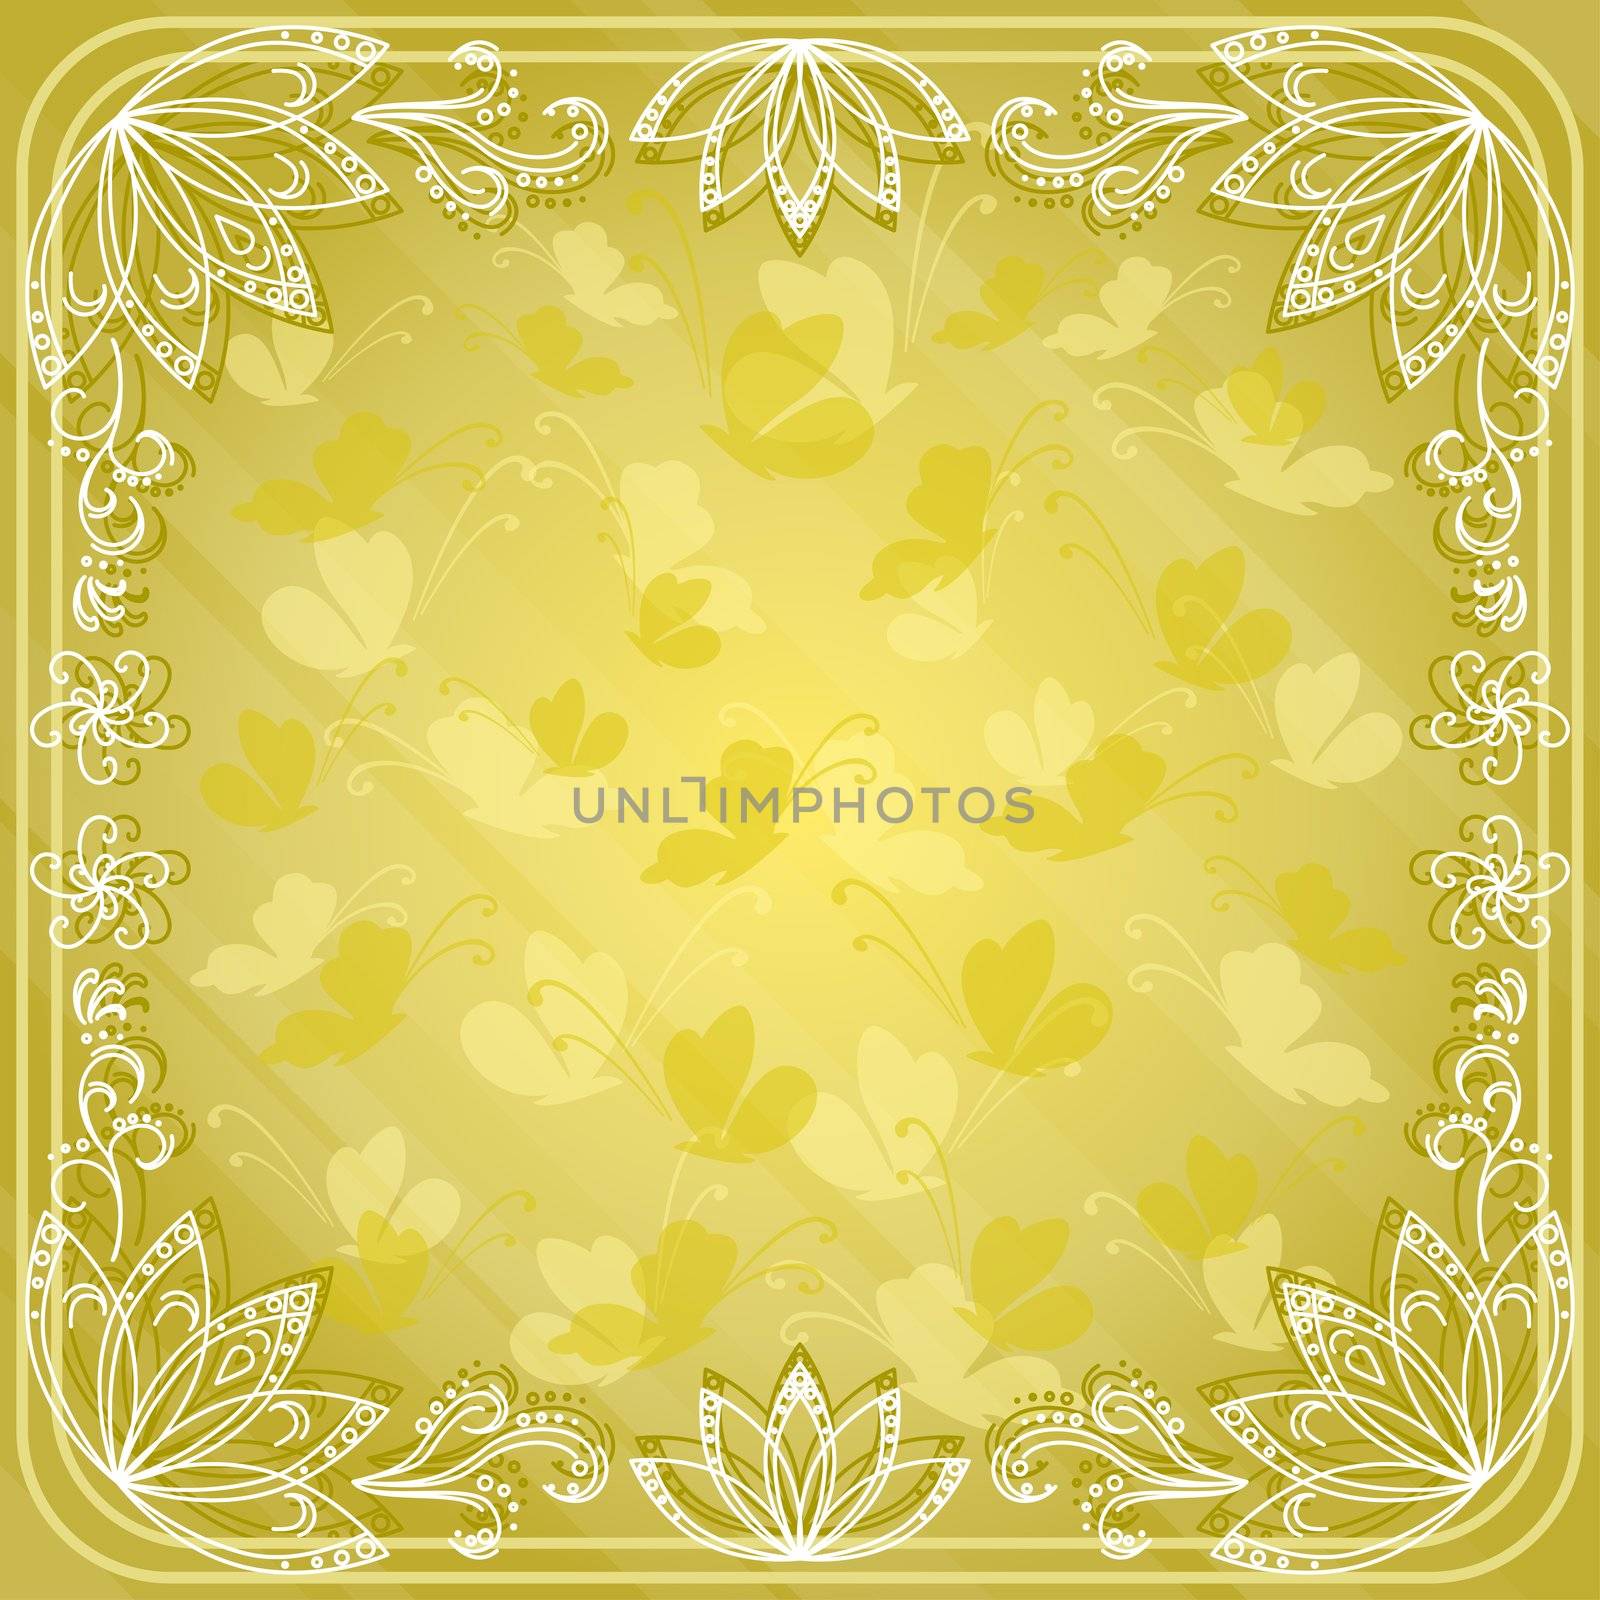 Abstract background with butterflies silhouettes and flowers contours